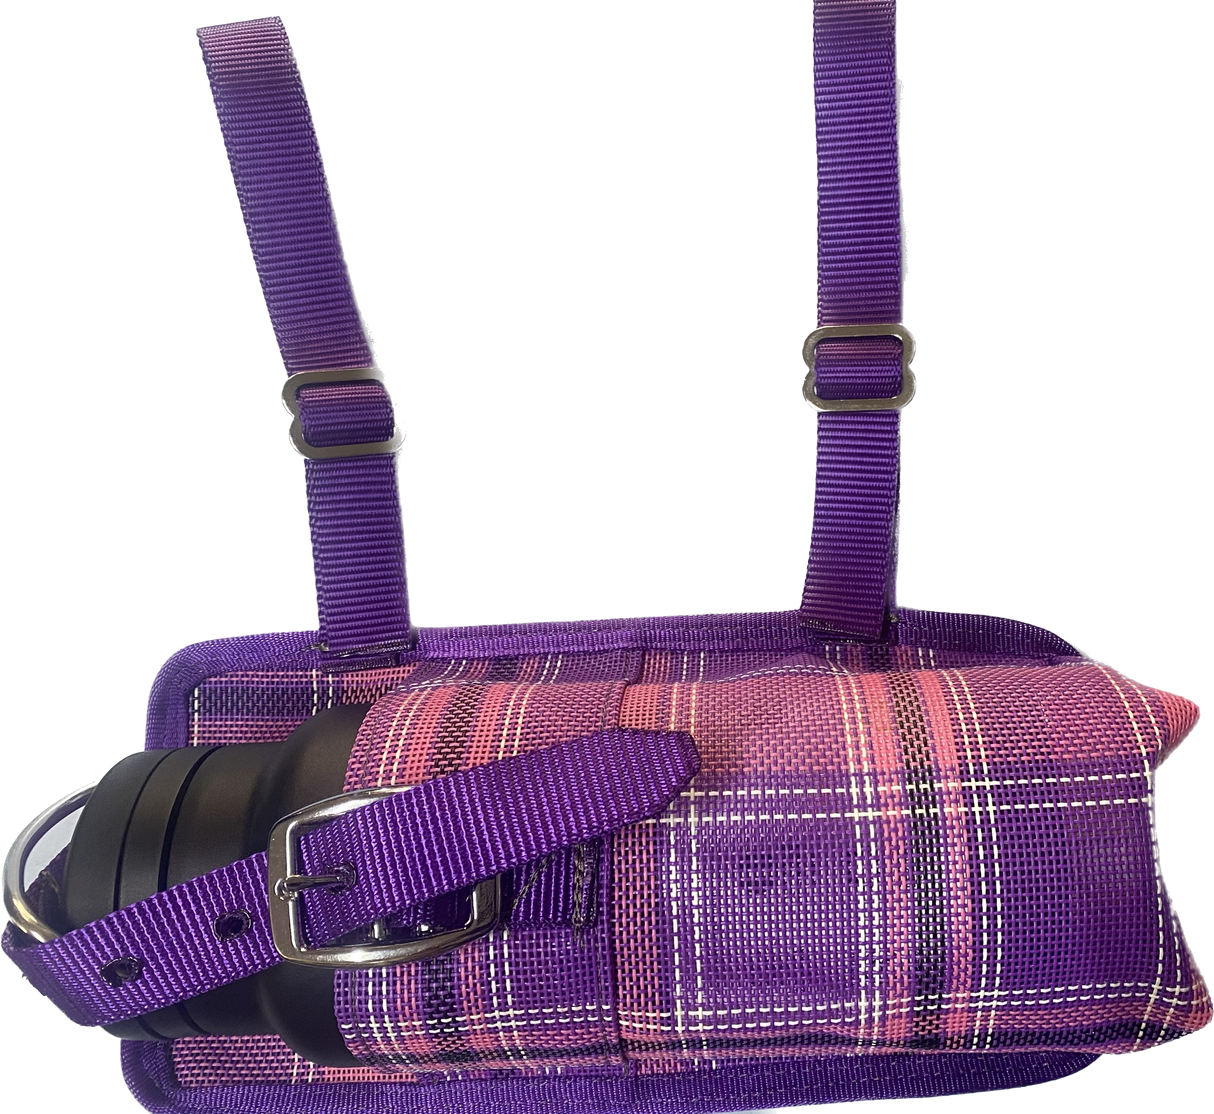 Cleanskins Water Bottle carrier with straps